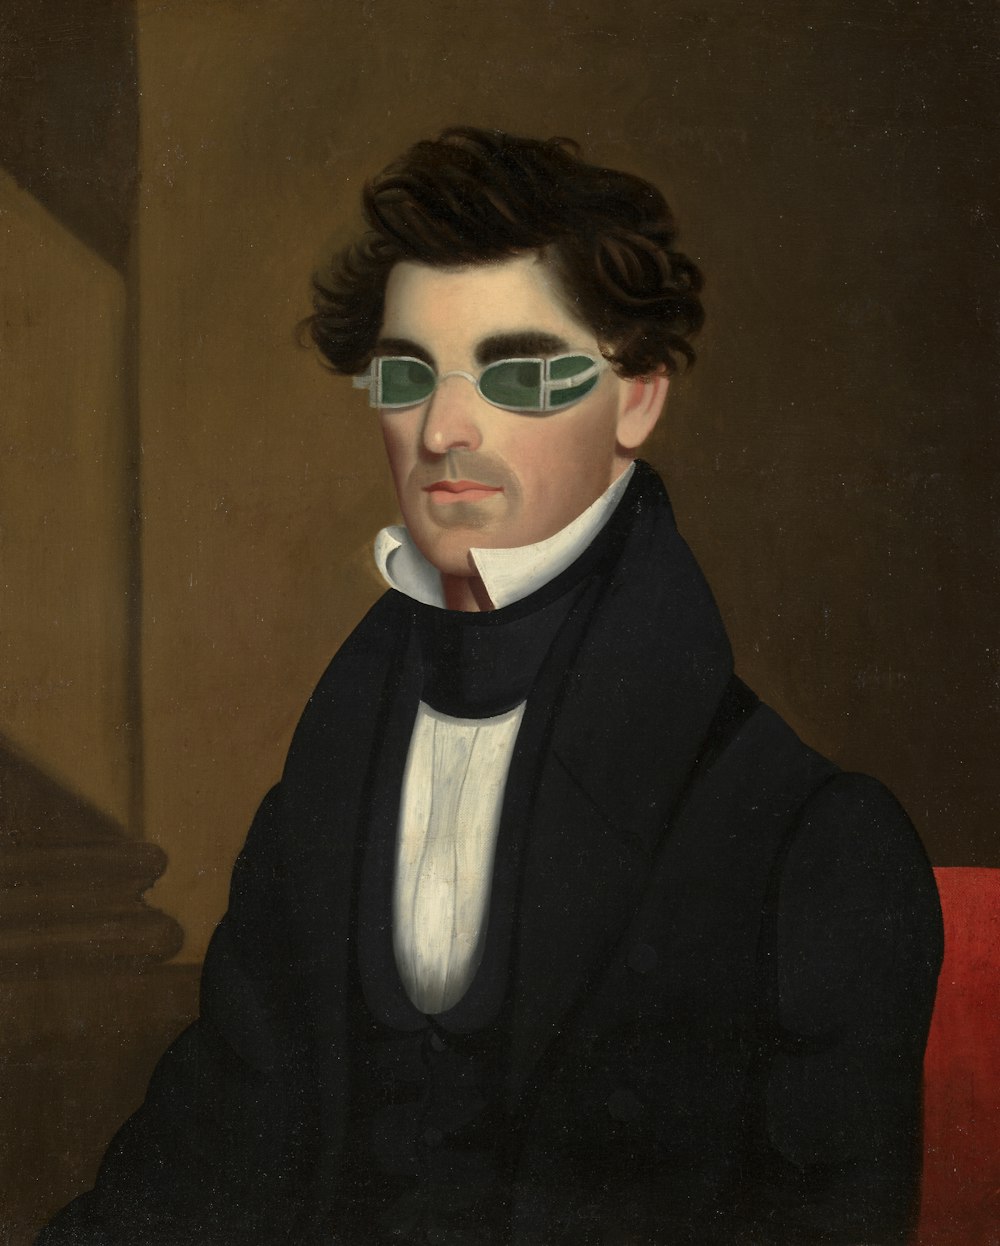 a painting of a man in a suit and sunglasses